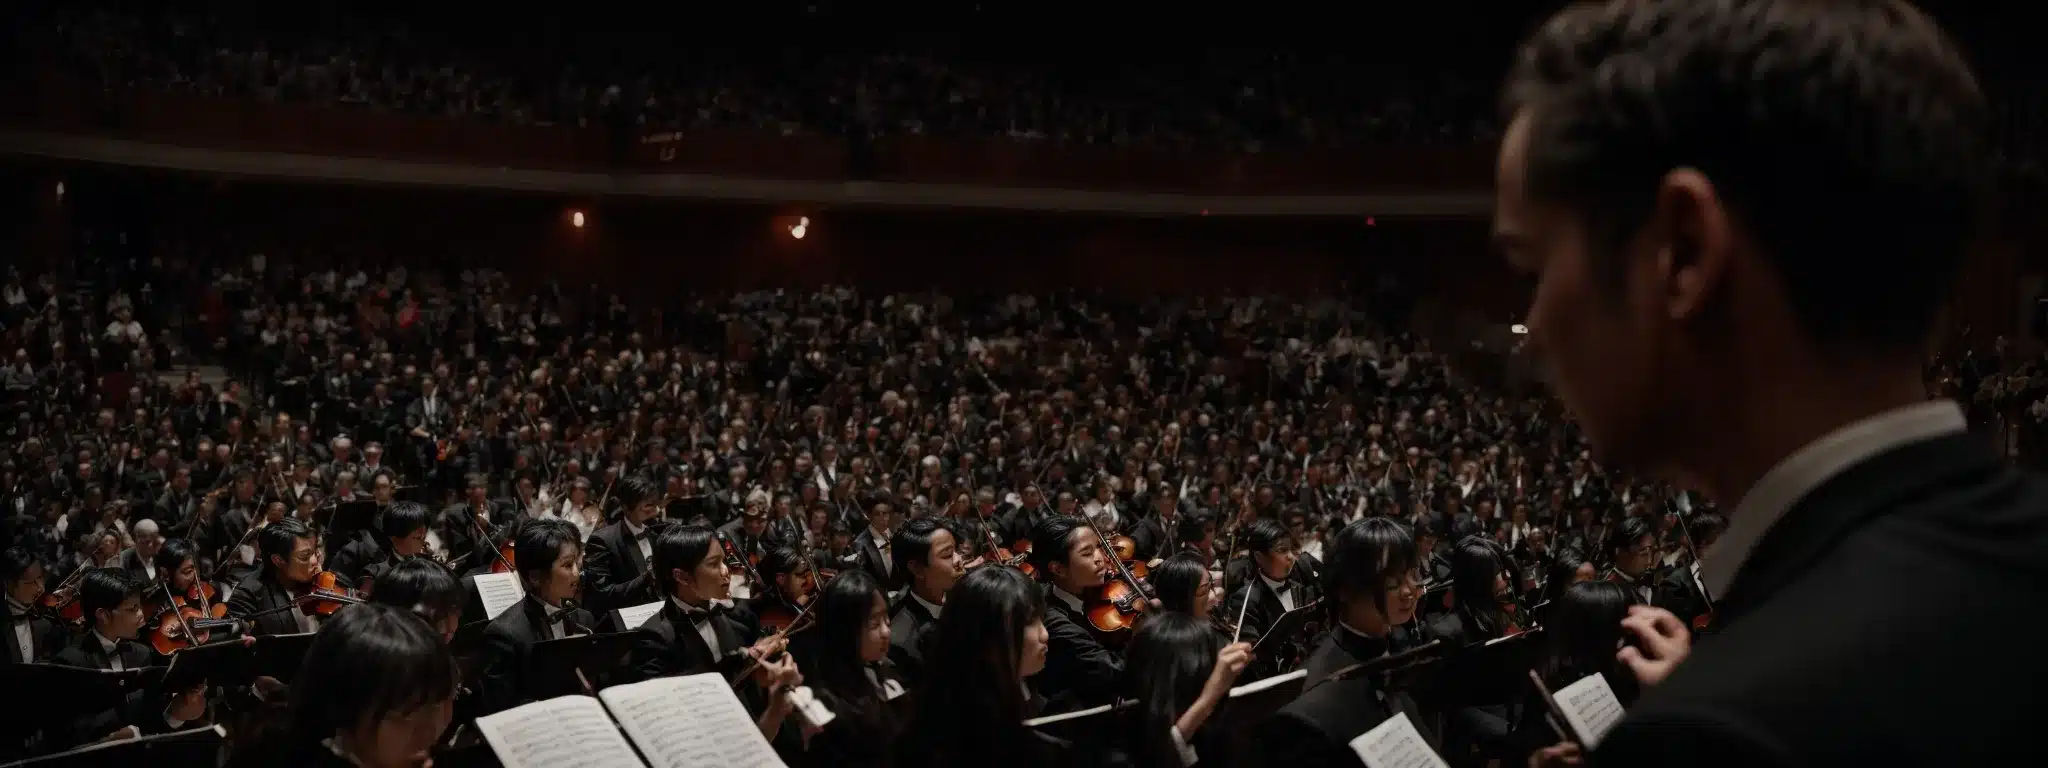 A Conductor Leading An Orchestra With Audience Members Visibly Engaged And Content In The Background.